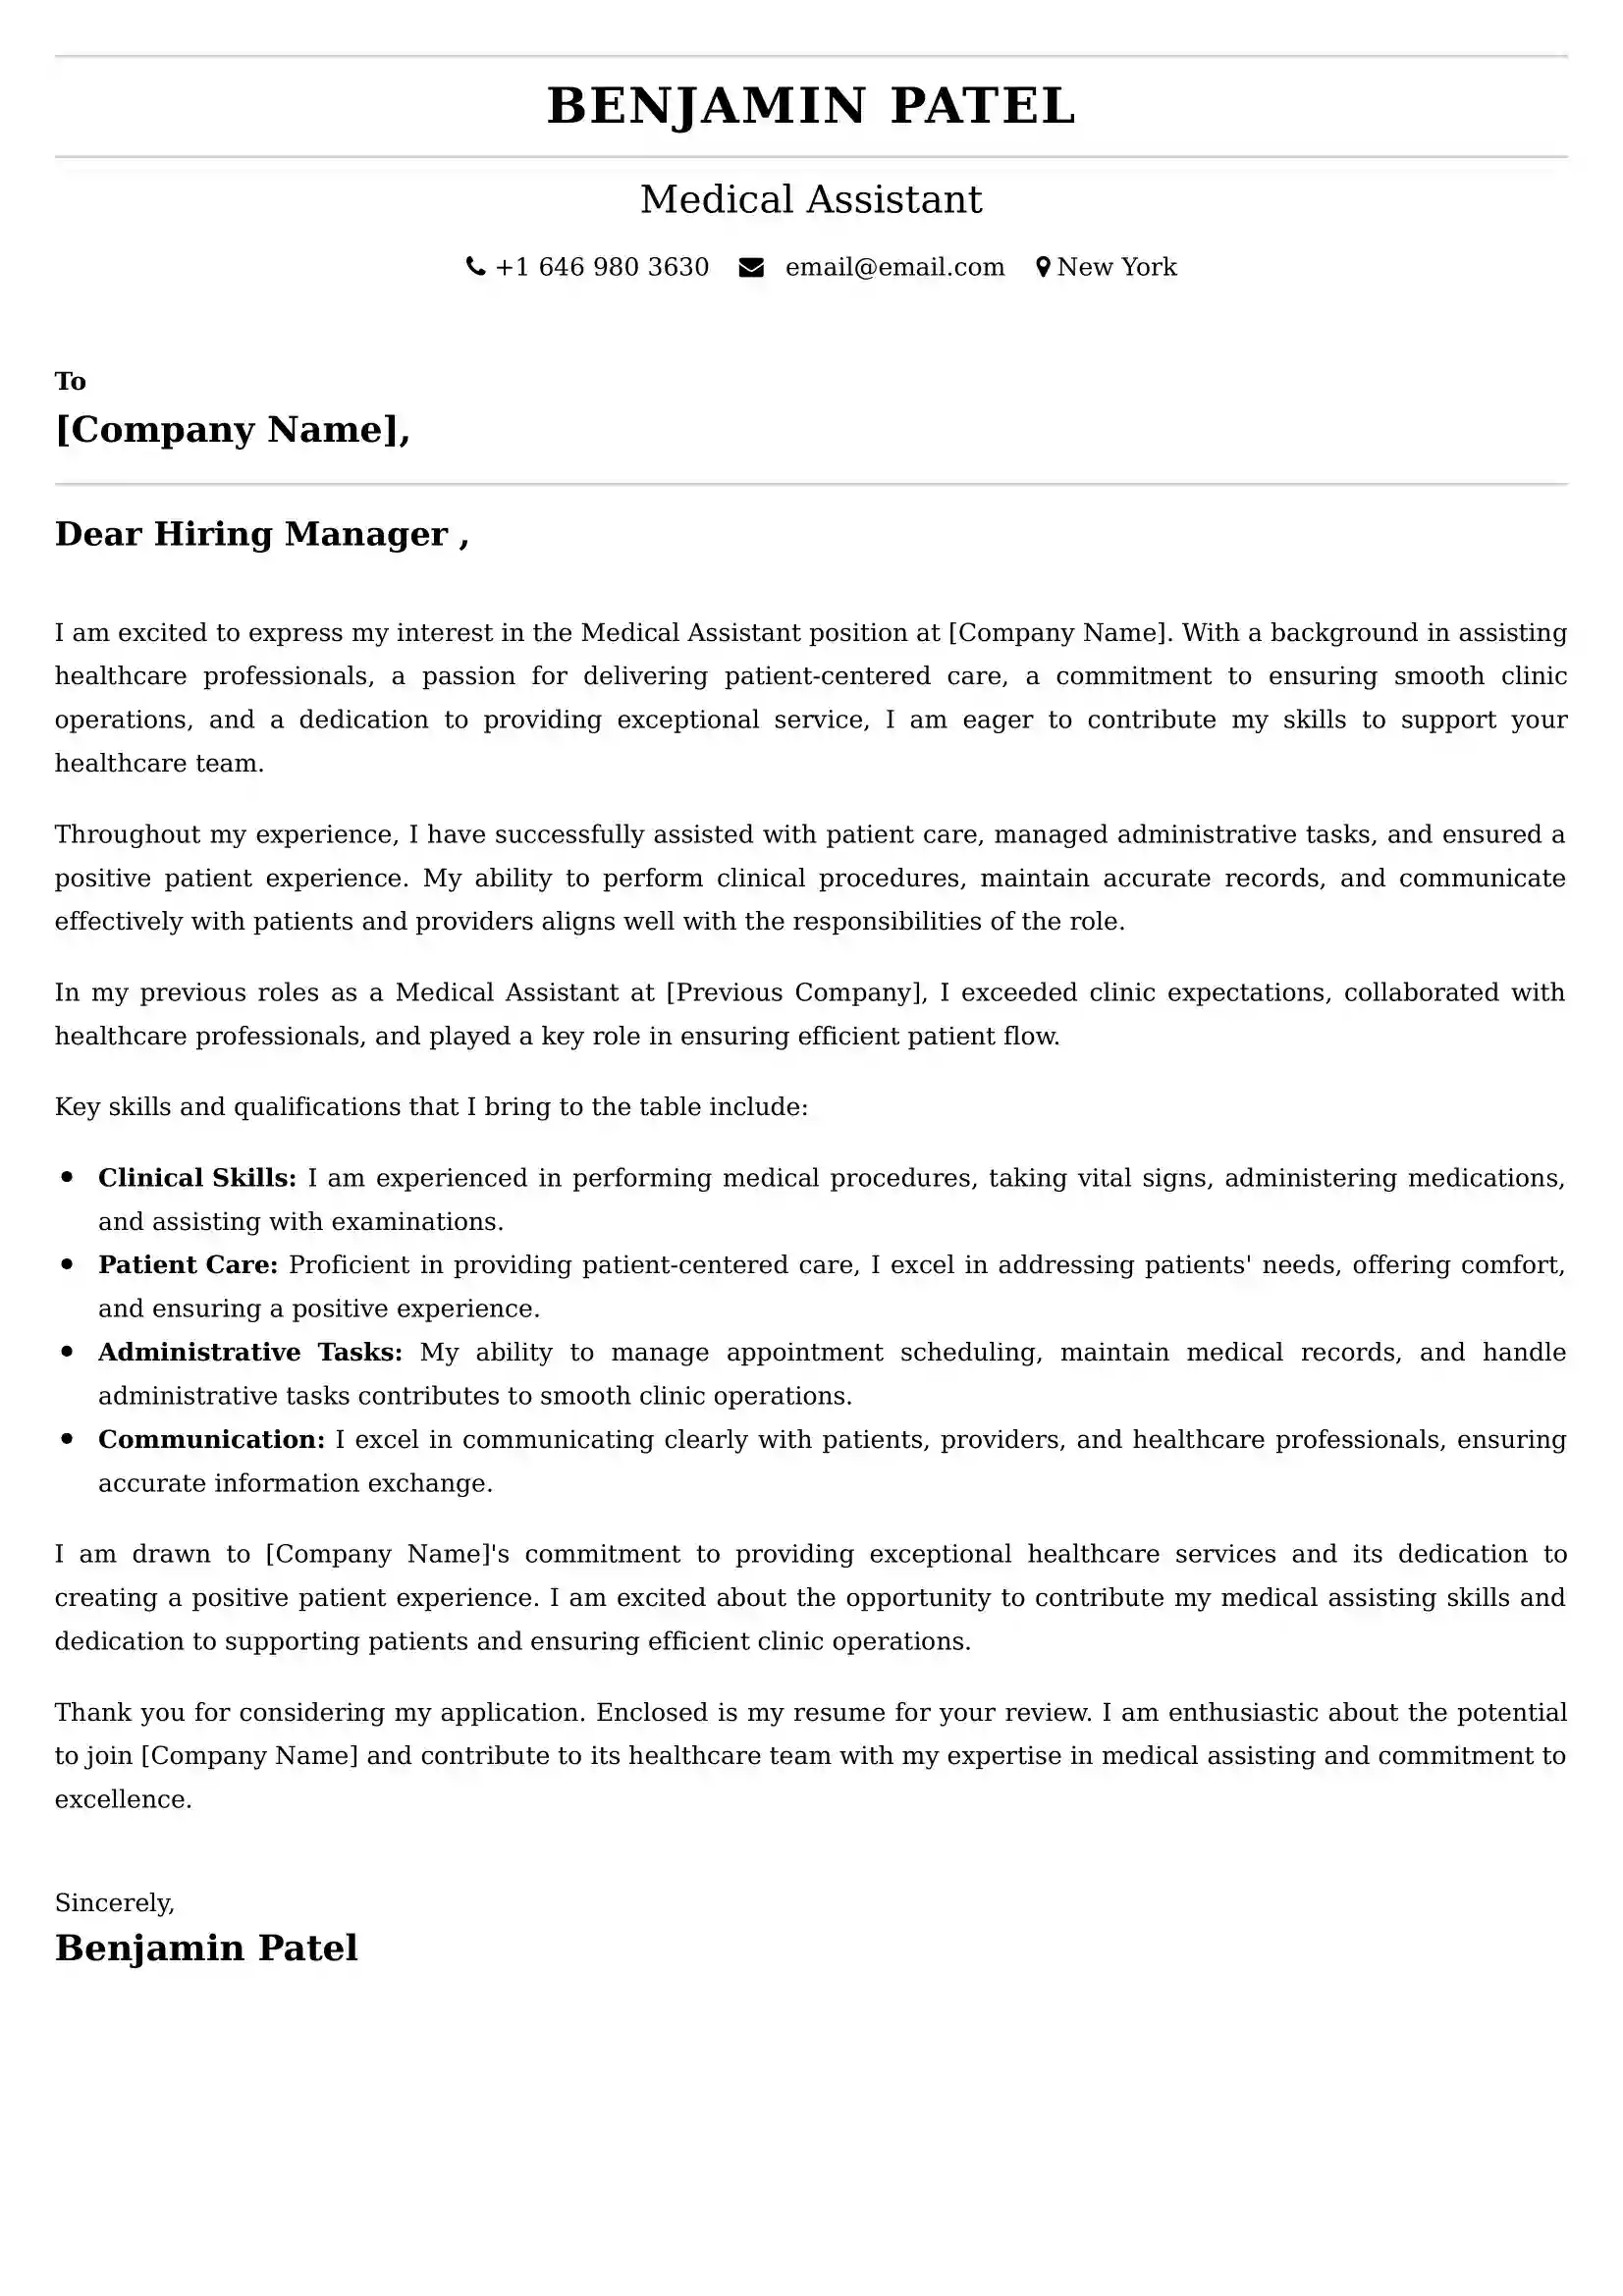 Medical Assistant Cover Letter Examples - Latest UK Format